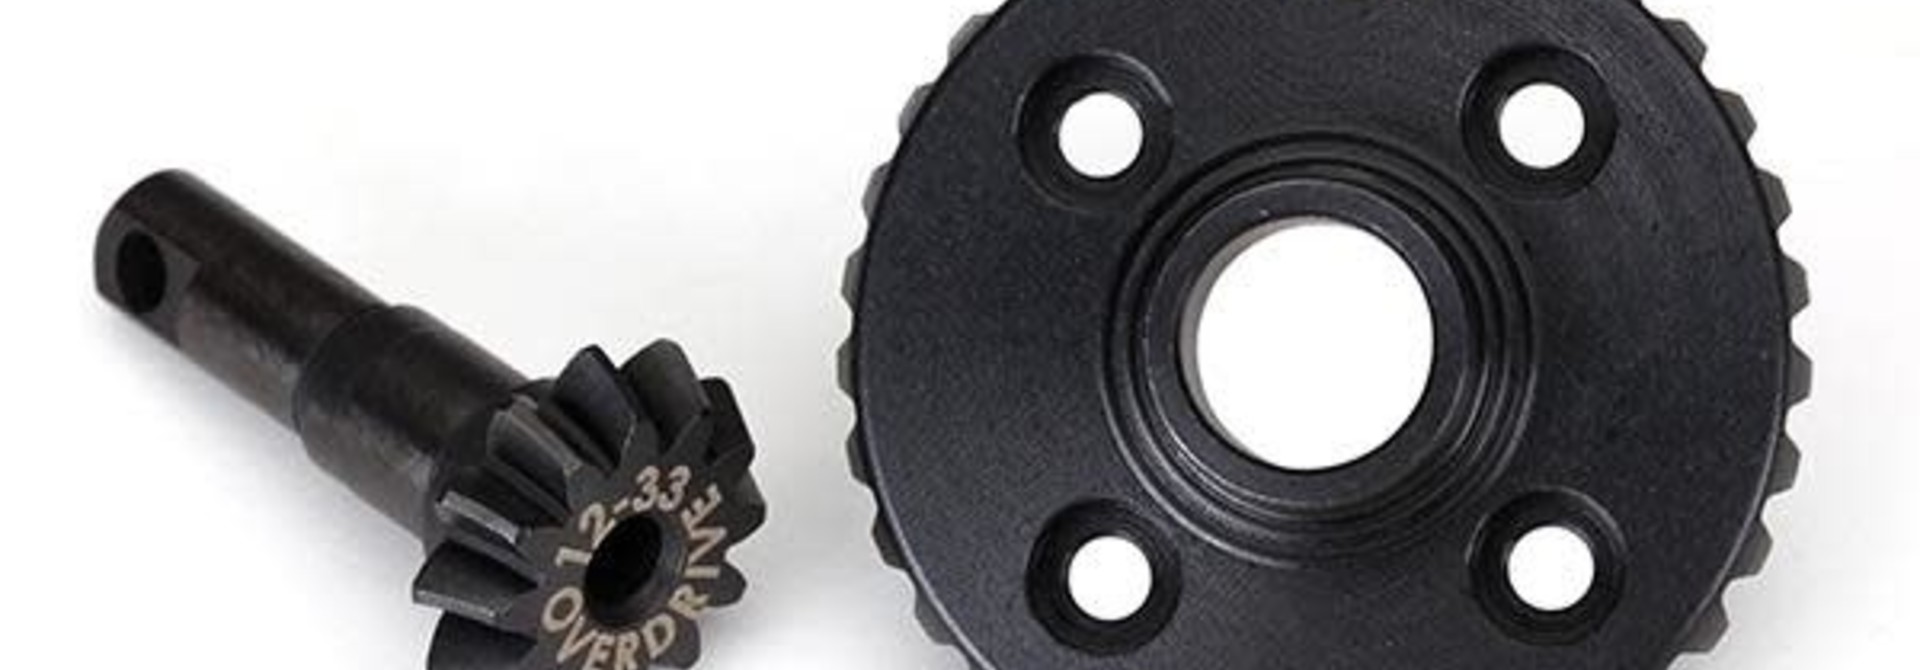 Ring gear, differential/ pinion gear, differential (overdrive, machined)